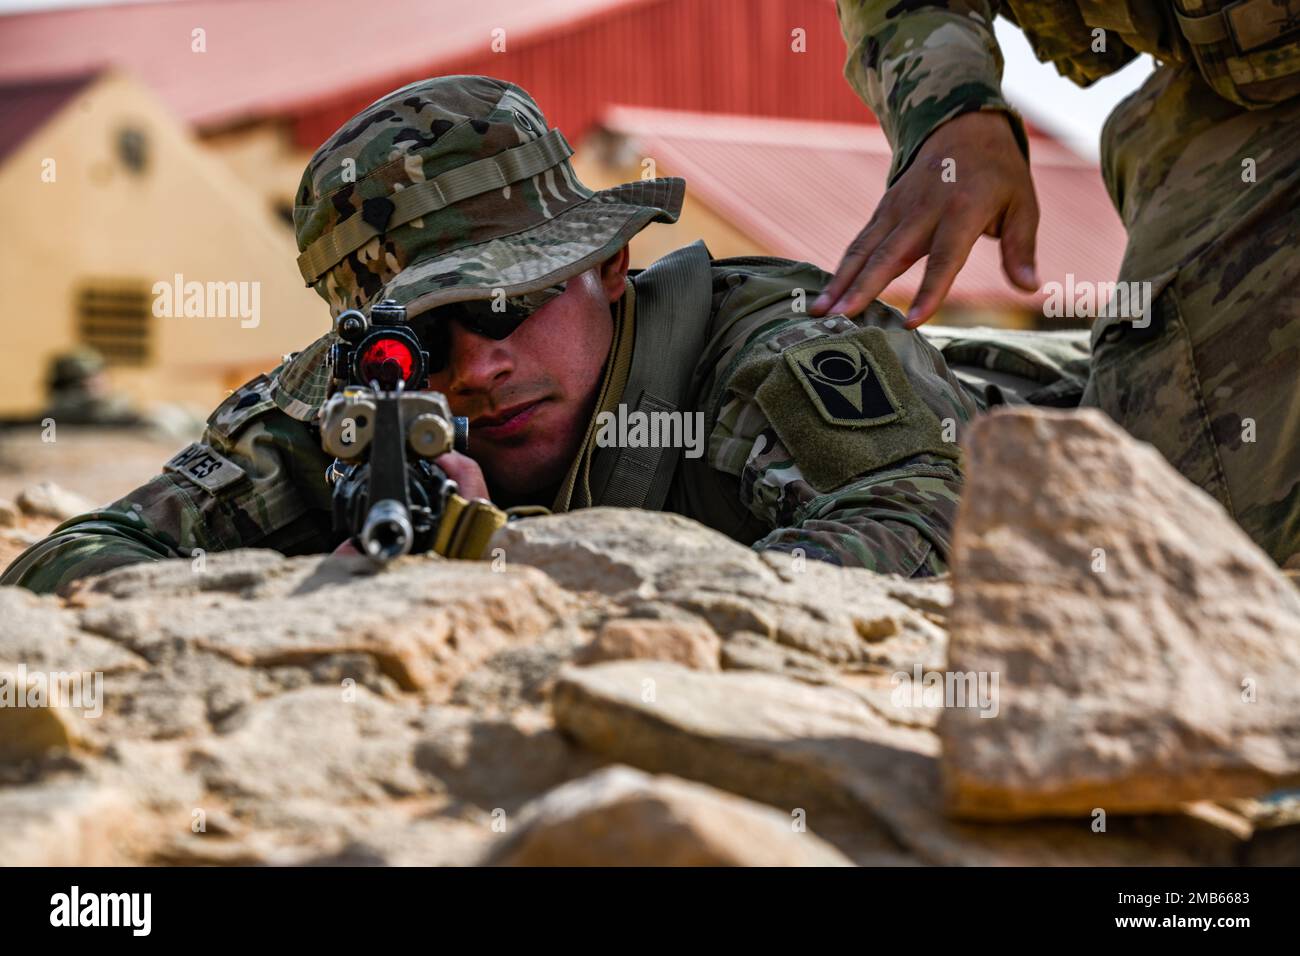 A U.S. Soldier assigned to Task Force Hurricane from the 1st Battalion, 124th Infantry Regiment, holds security during a platoon immersion in Al-Kharj, Kingdom of Saudi Arabia, June 12, 2022. The immersion was a training event meant to build interoperability between the U.S Army and Royal Saudi Land Force at the platoon level while enhancing both U.S. and partner nation skillsets. Stock Photo